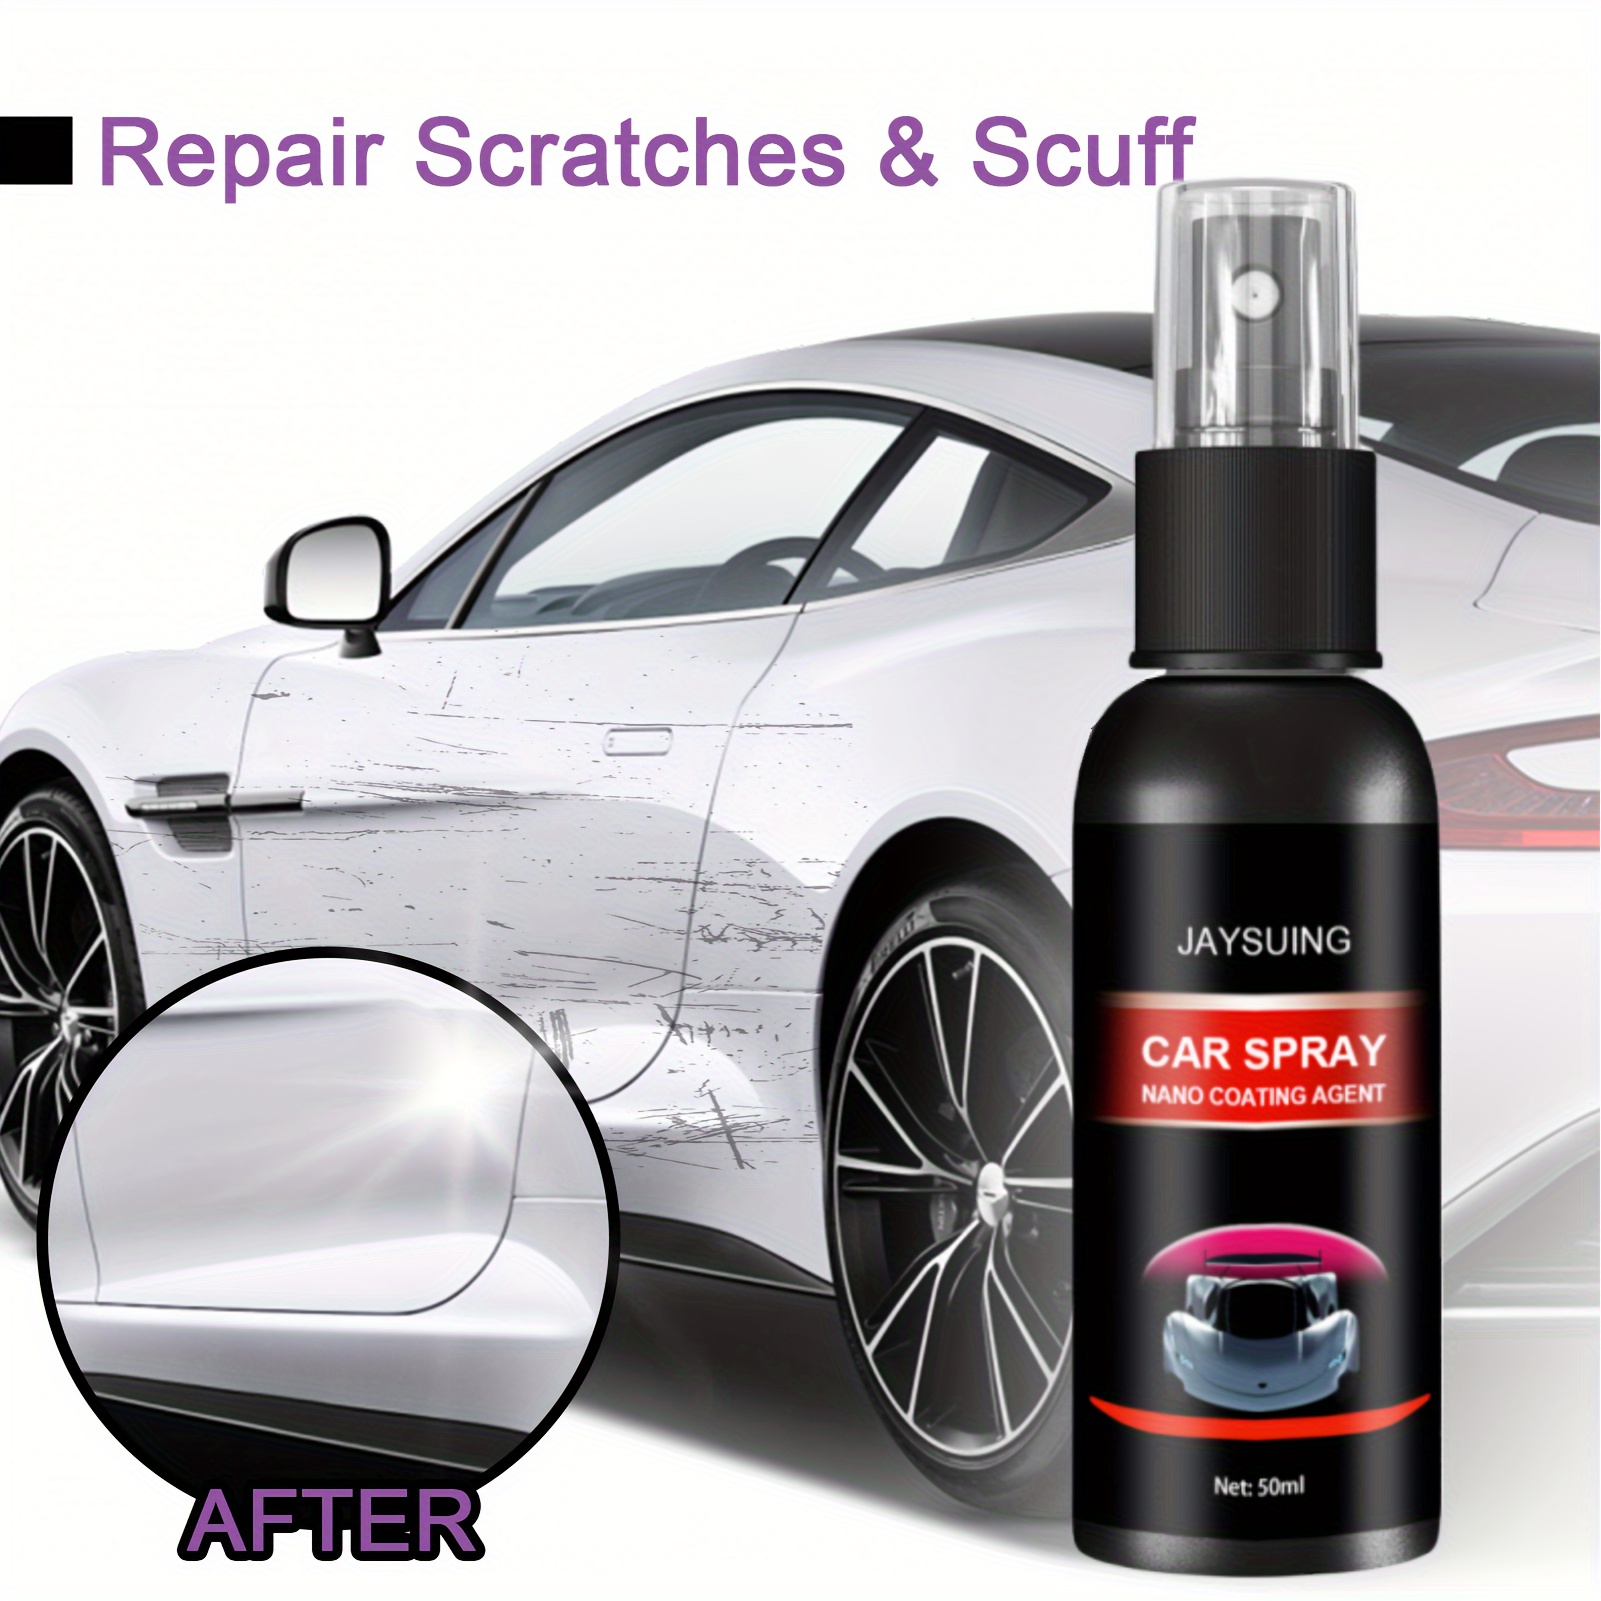 3 In 1 High Protection Quick Car Paint Cleaning Coating Spray